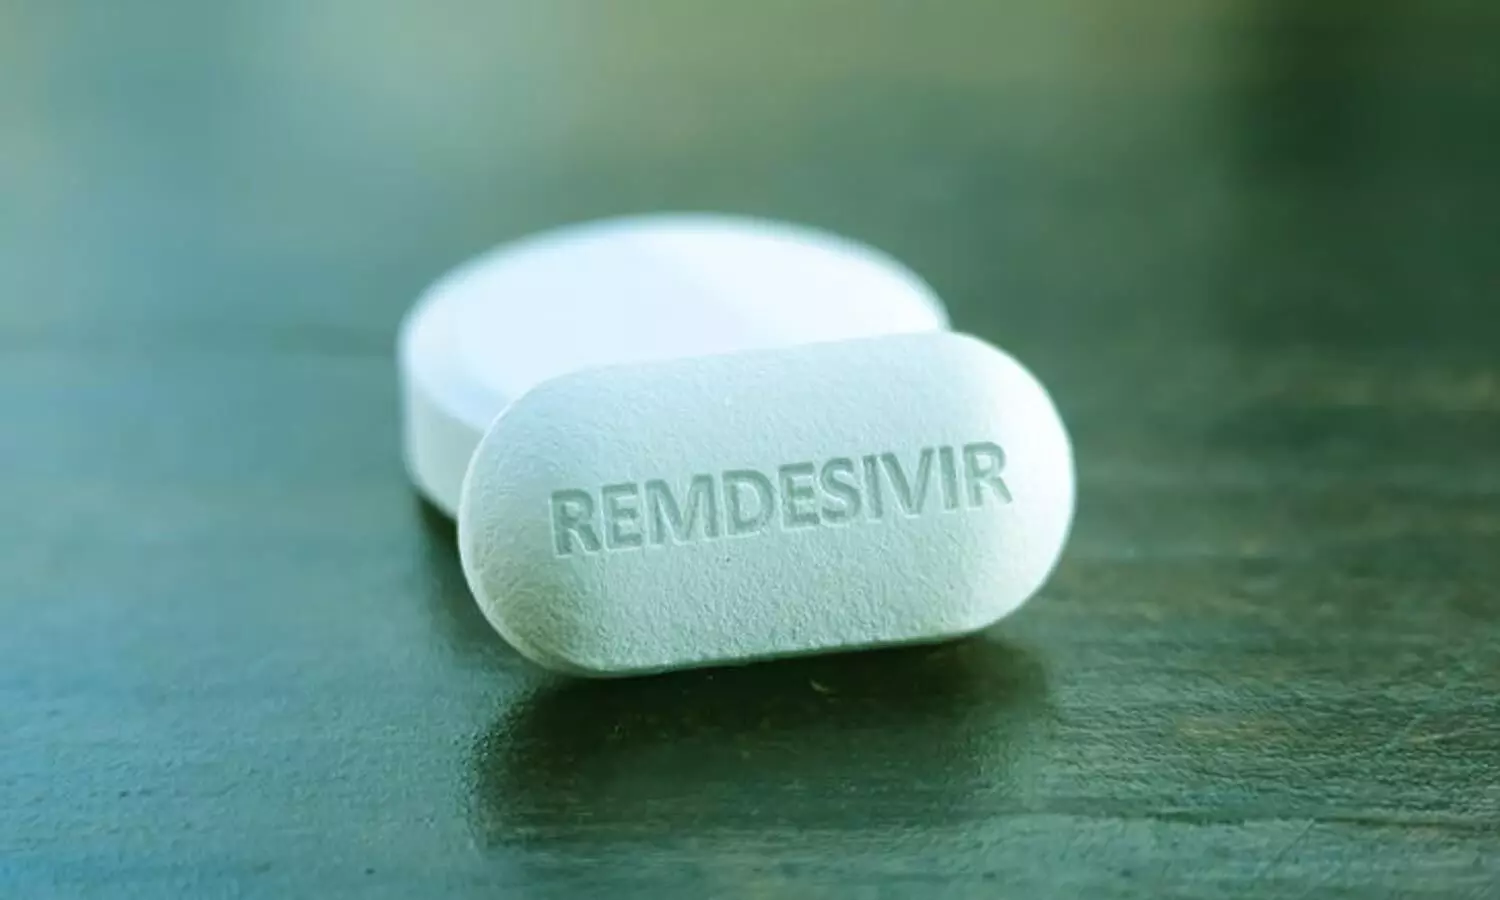 Remdesivir significantly cuts hospitalization, death risk in moderate to severe COVID-19 patients: Study